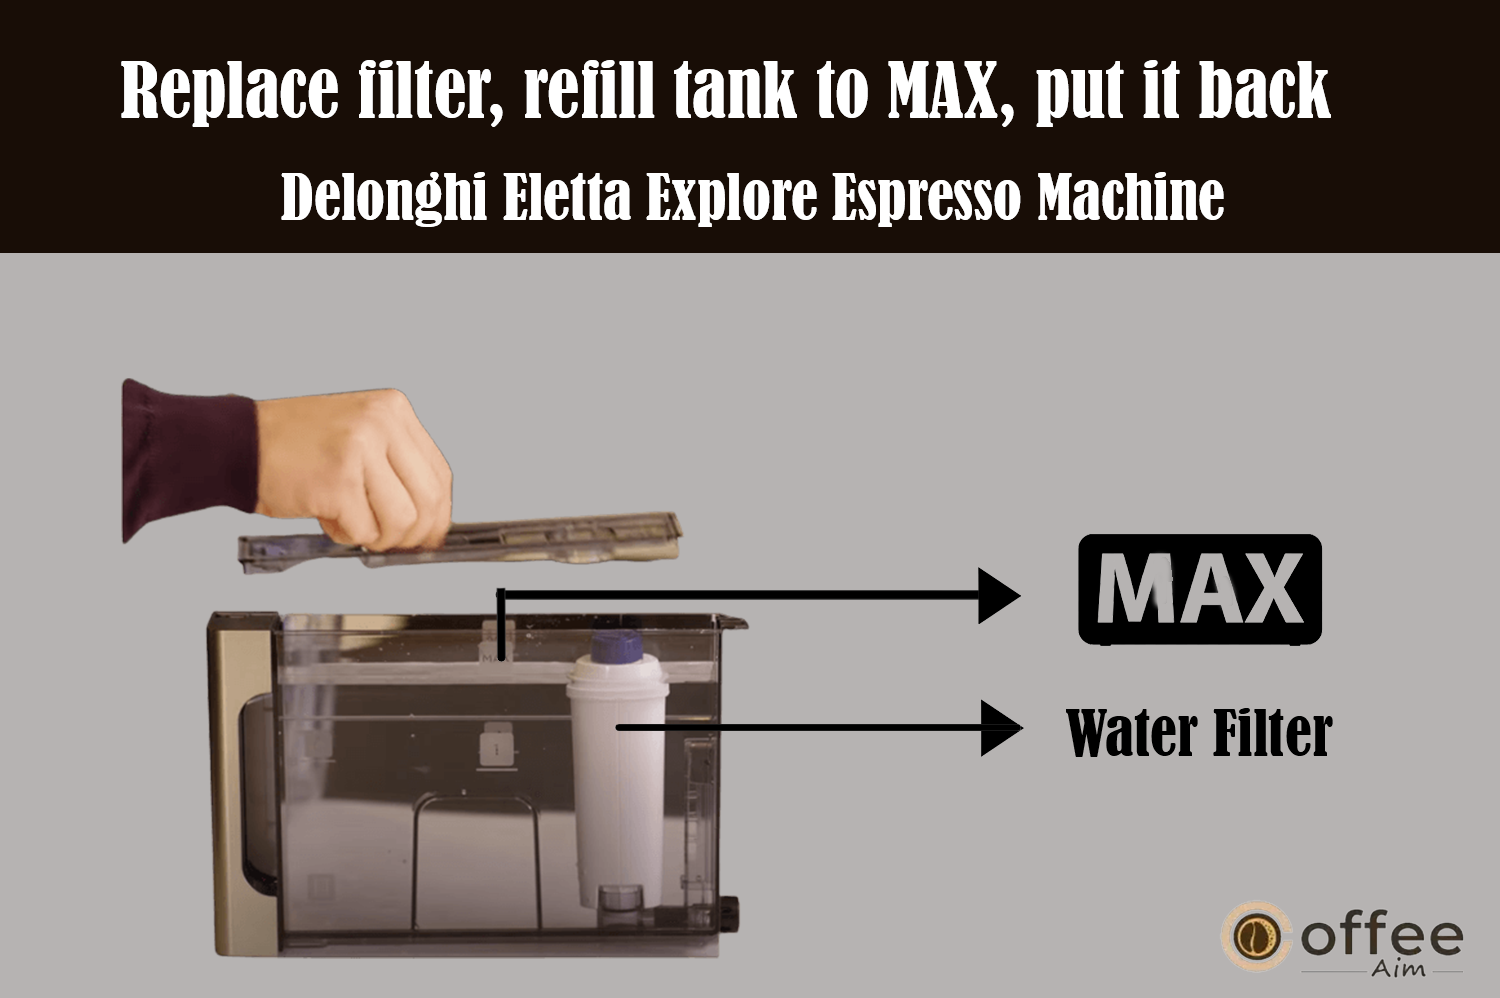 The image illustrates the process of replacing the filter, refilling the tank to its maximum capacity, and repositioning it at the rear of the "Delonghi Eletta Explore Espresso Machine," as described in the article "How to Use the Delonghi Eletta Explore Espresso Machine."